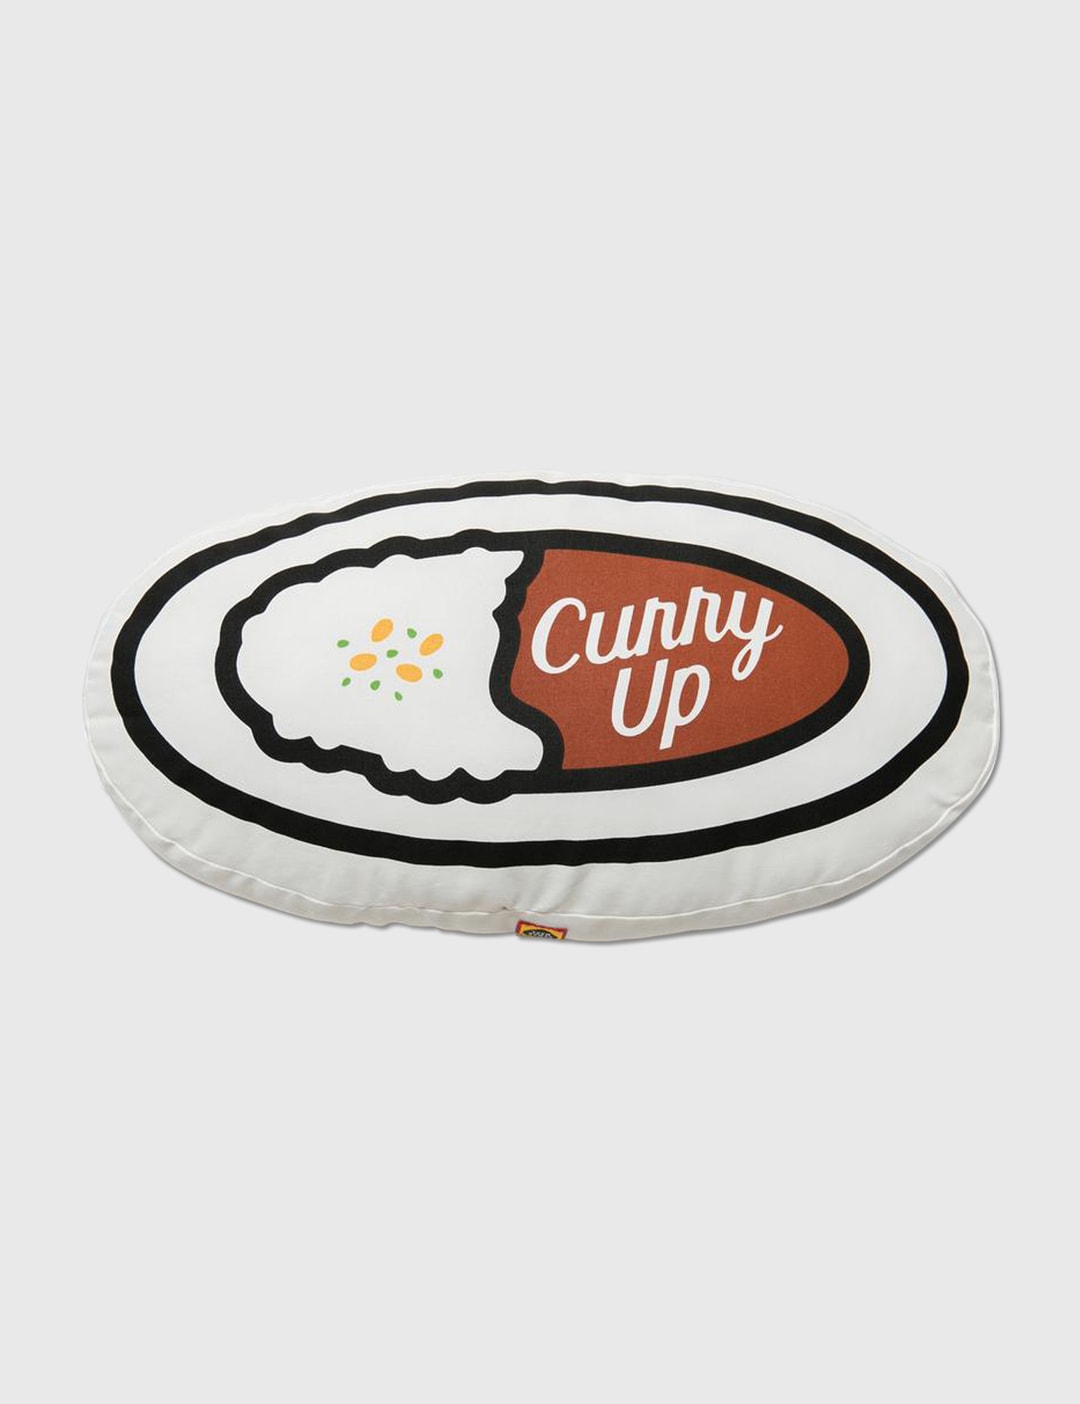 Curry Up クッション Placeholder Image